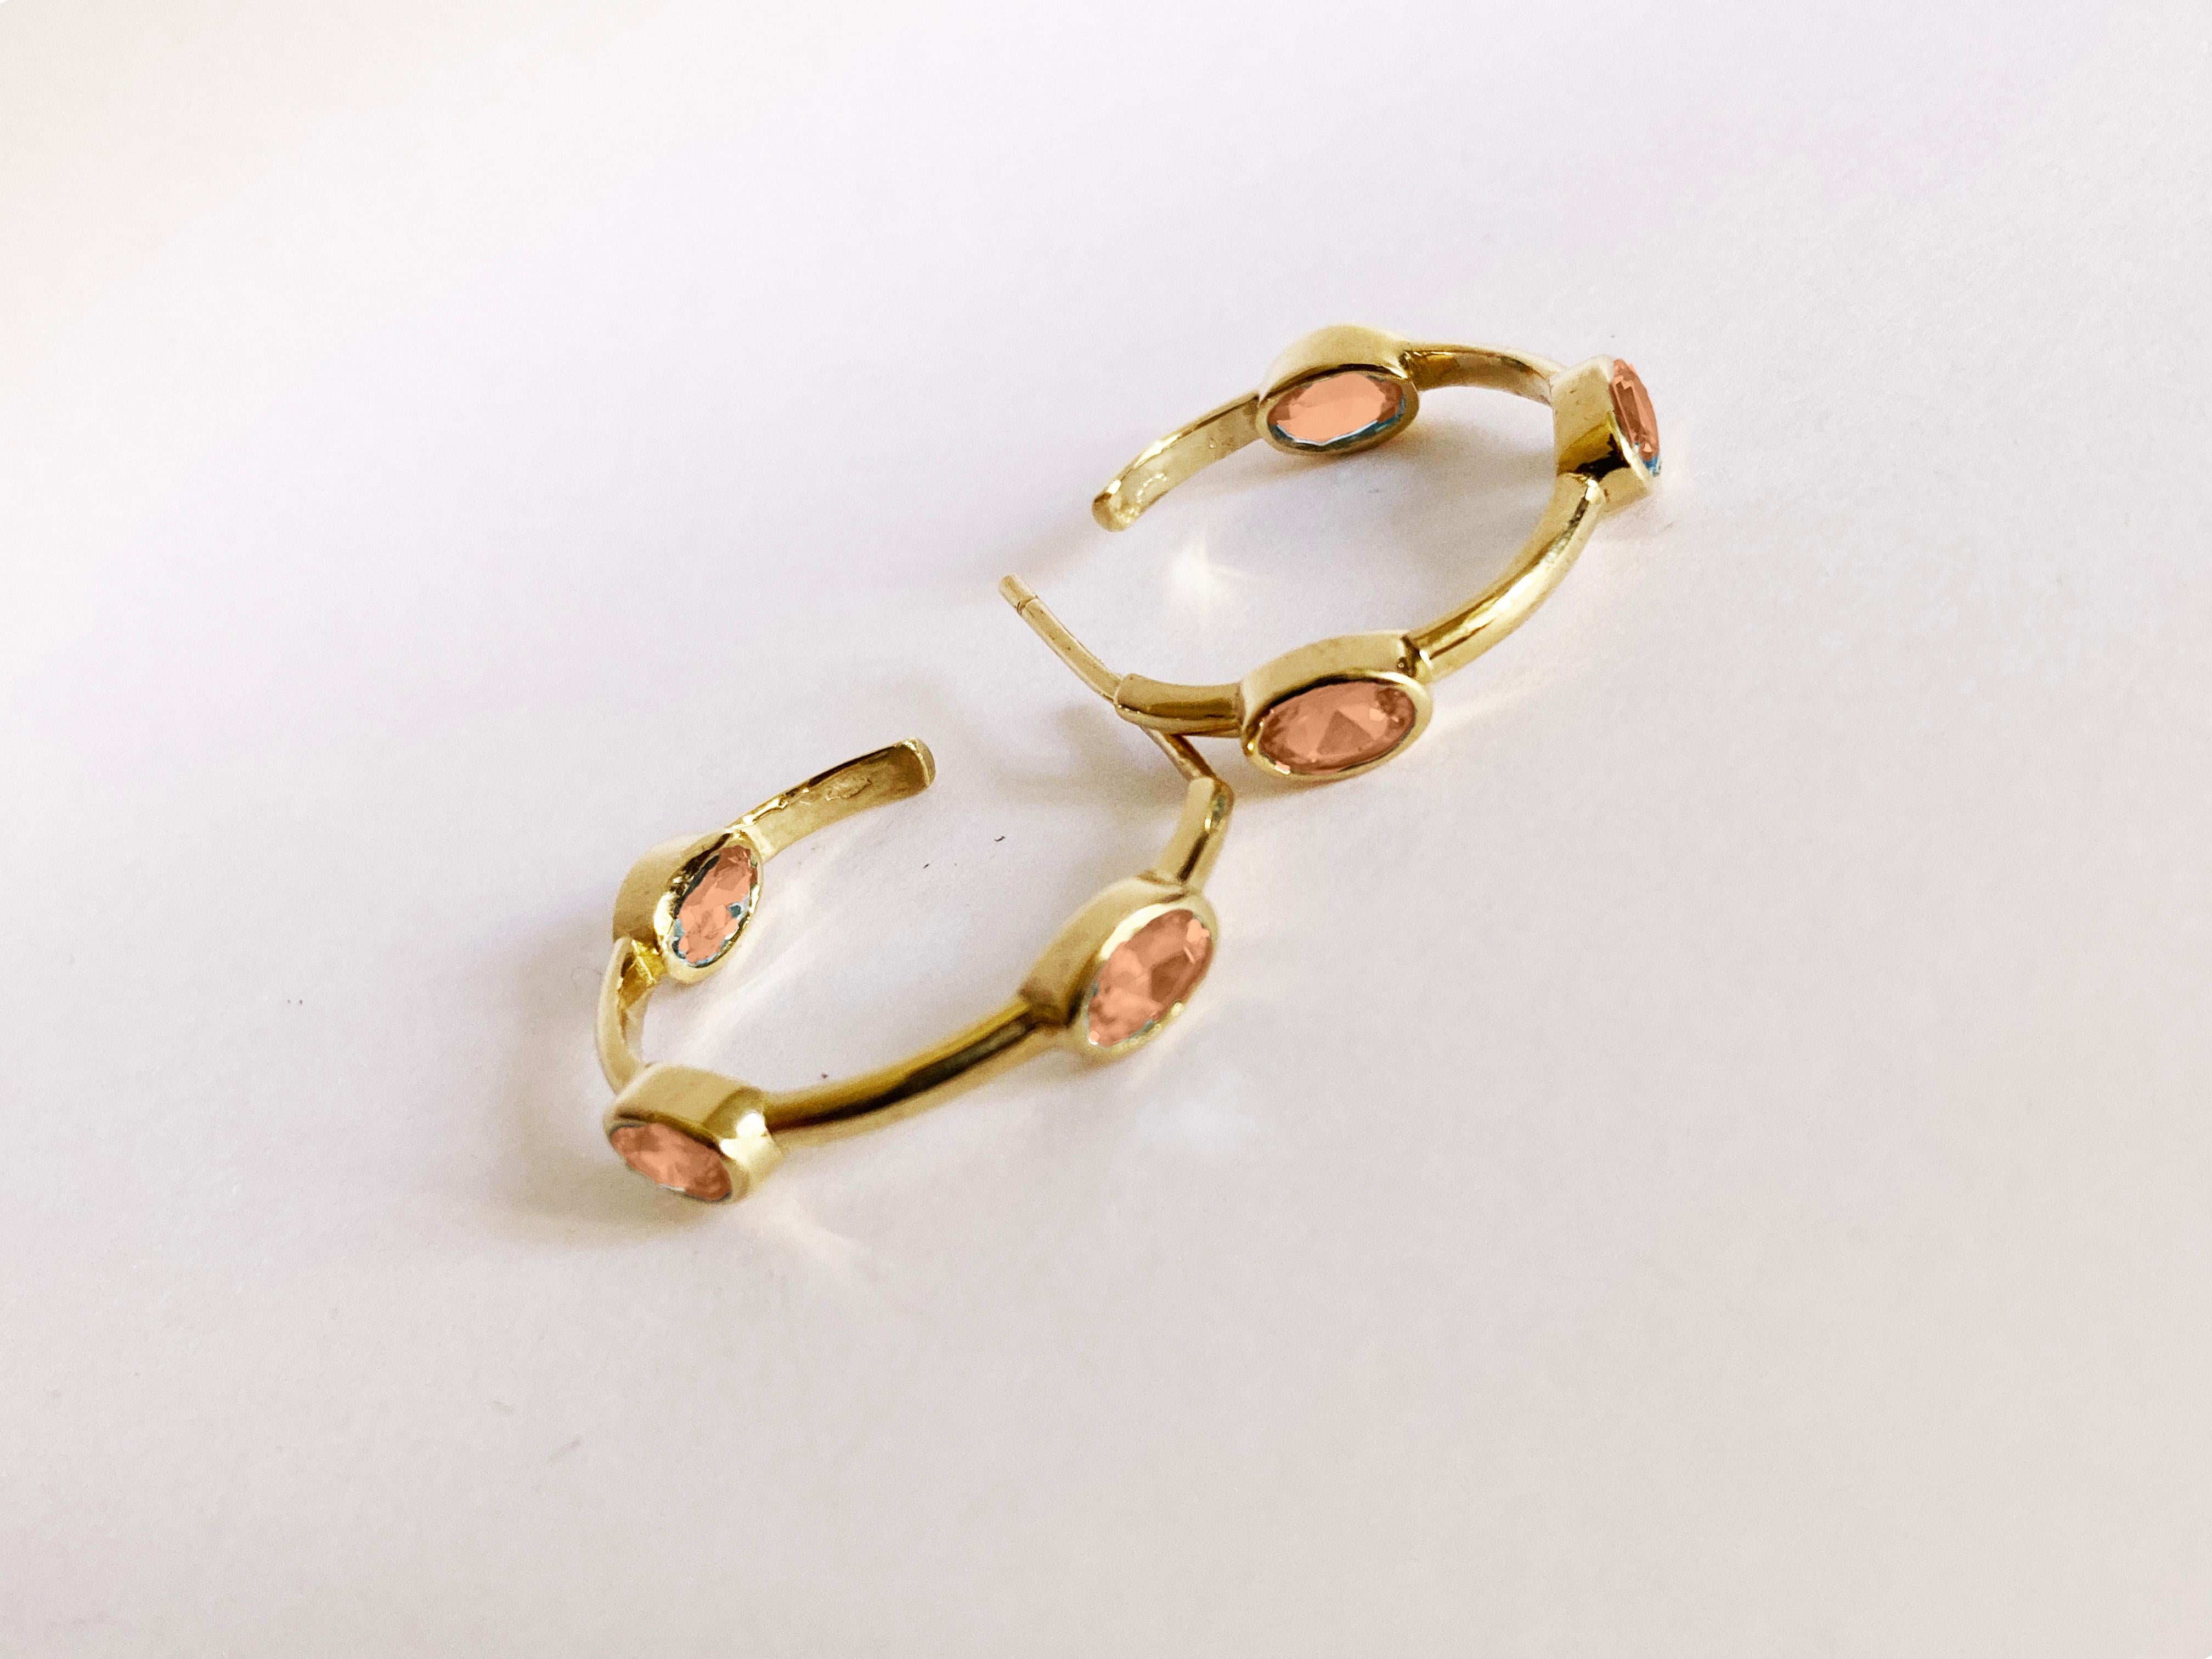 Rossella Ugolini Unisex Citrine Hoop Earrings 18K Yellow Gold Made In Italy For Sale 2